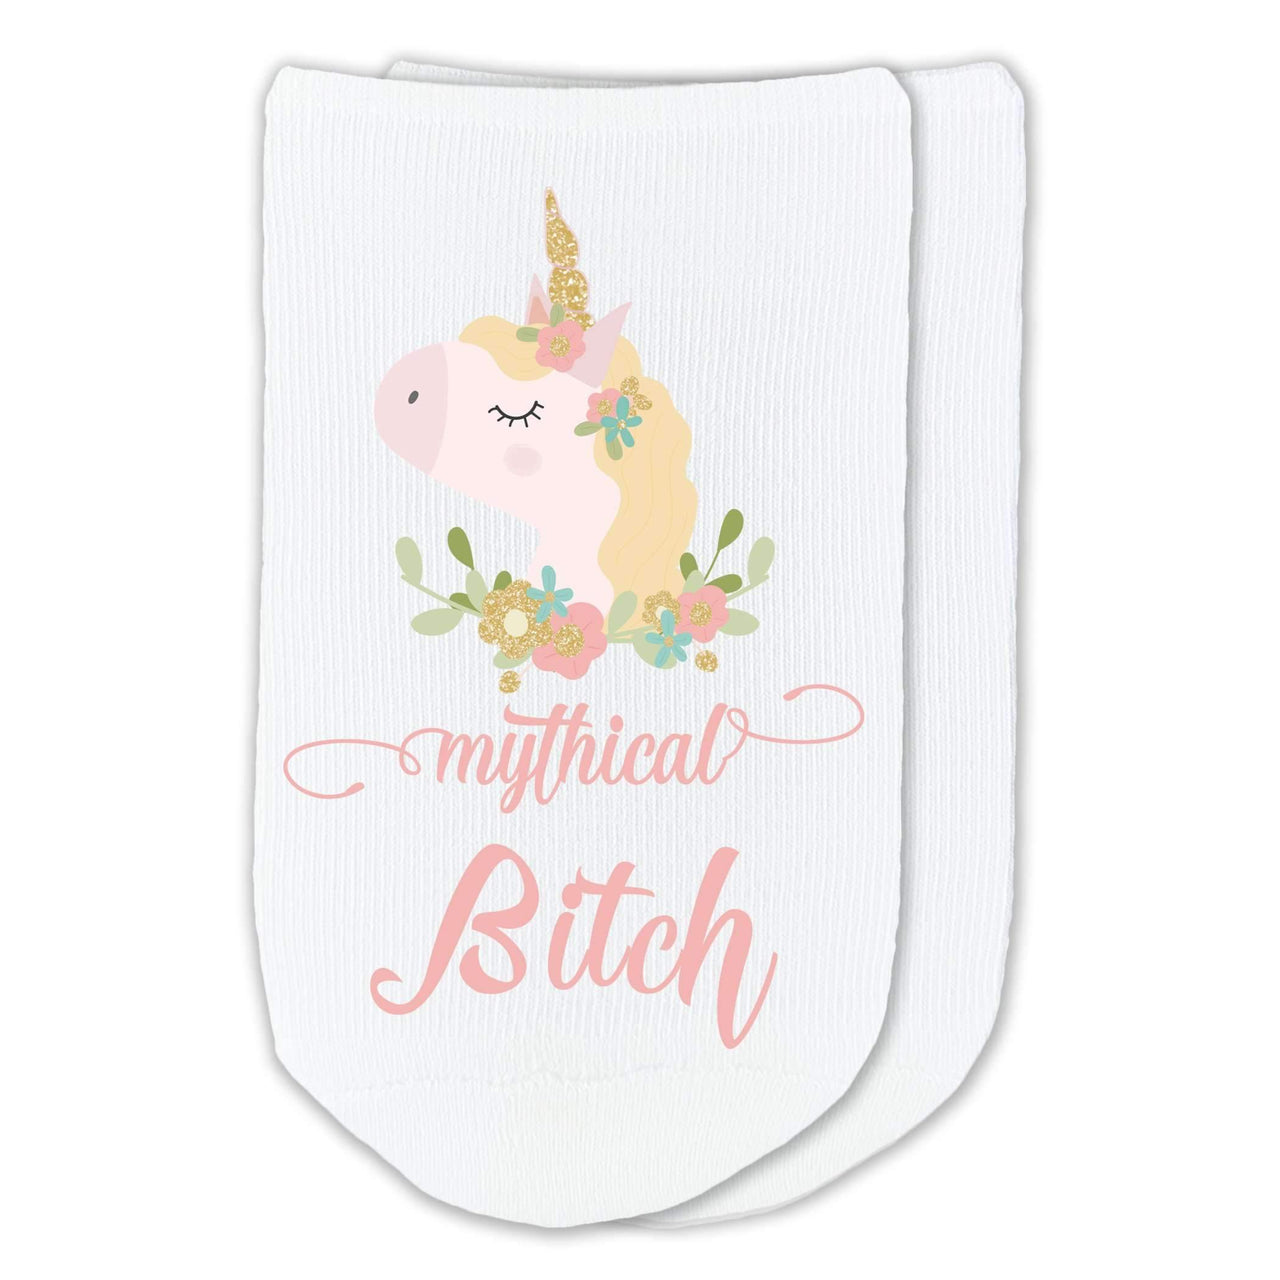 Fun saying for your favorite friends are these digitally printed Mythical bitch unicorn design custom printed on comfortable white cotton no show socks.